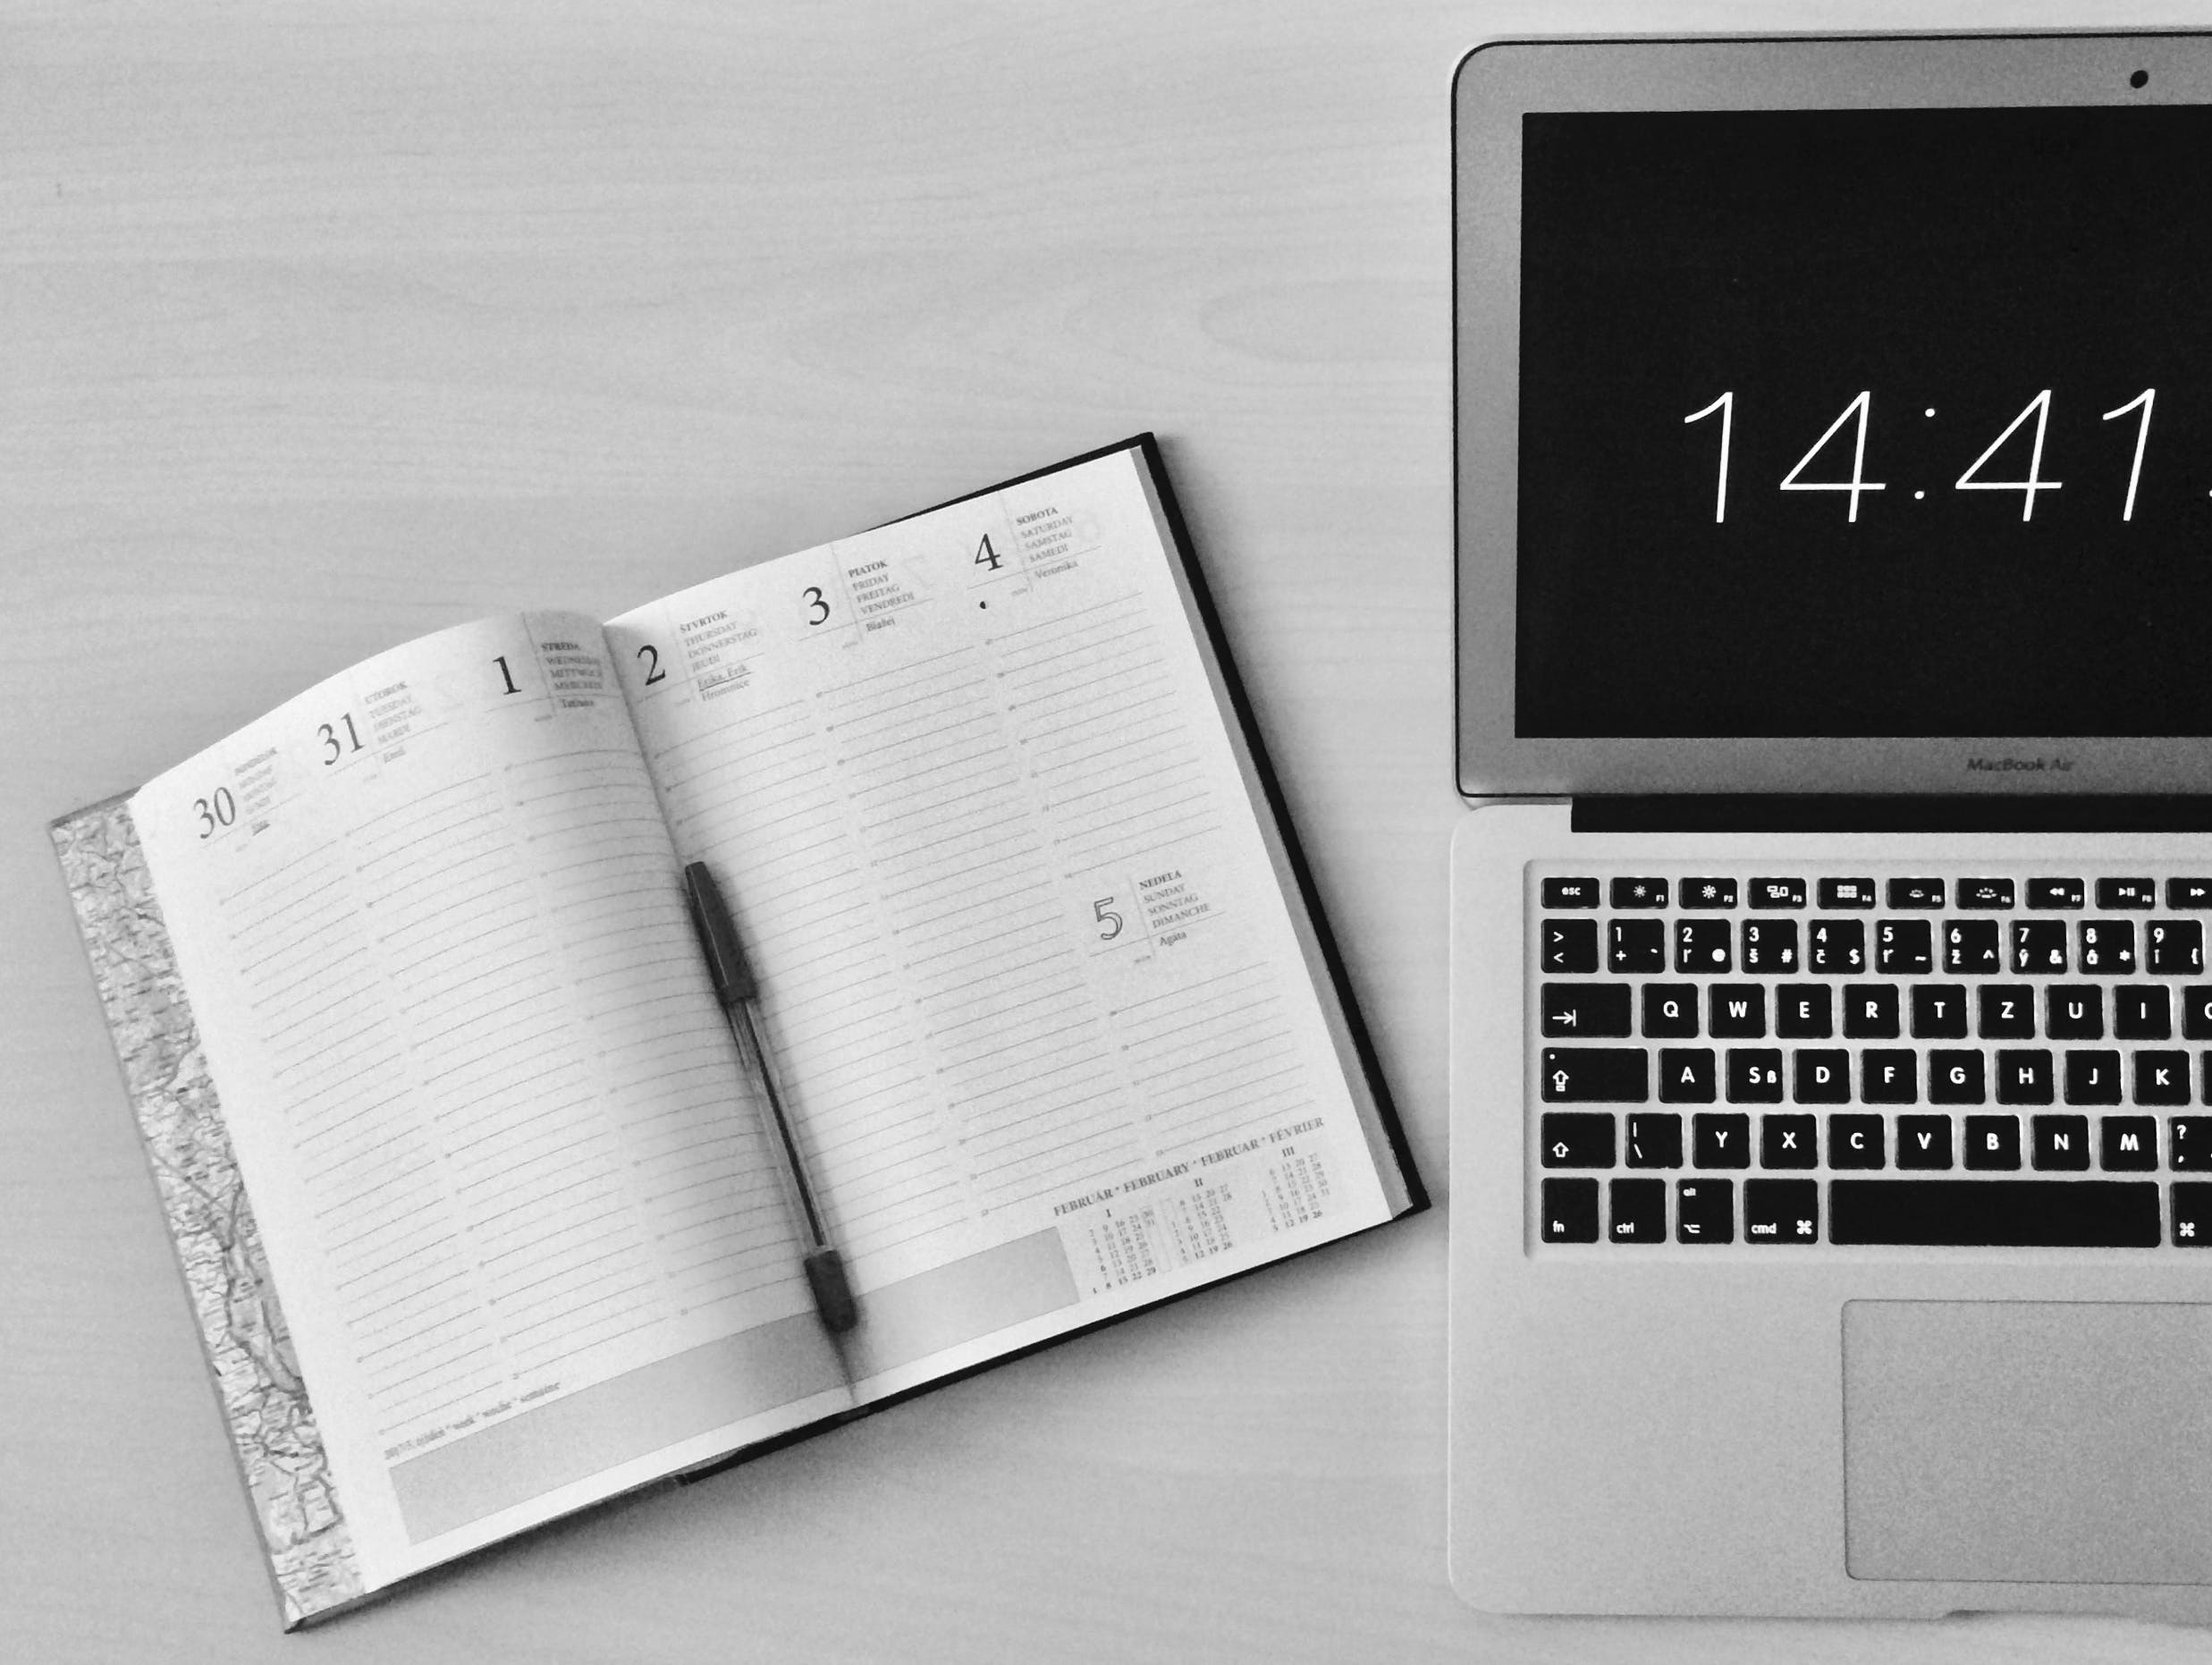 Utilizing Time Management Tools and Techniques